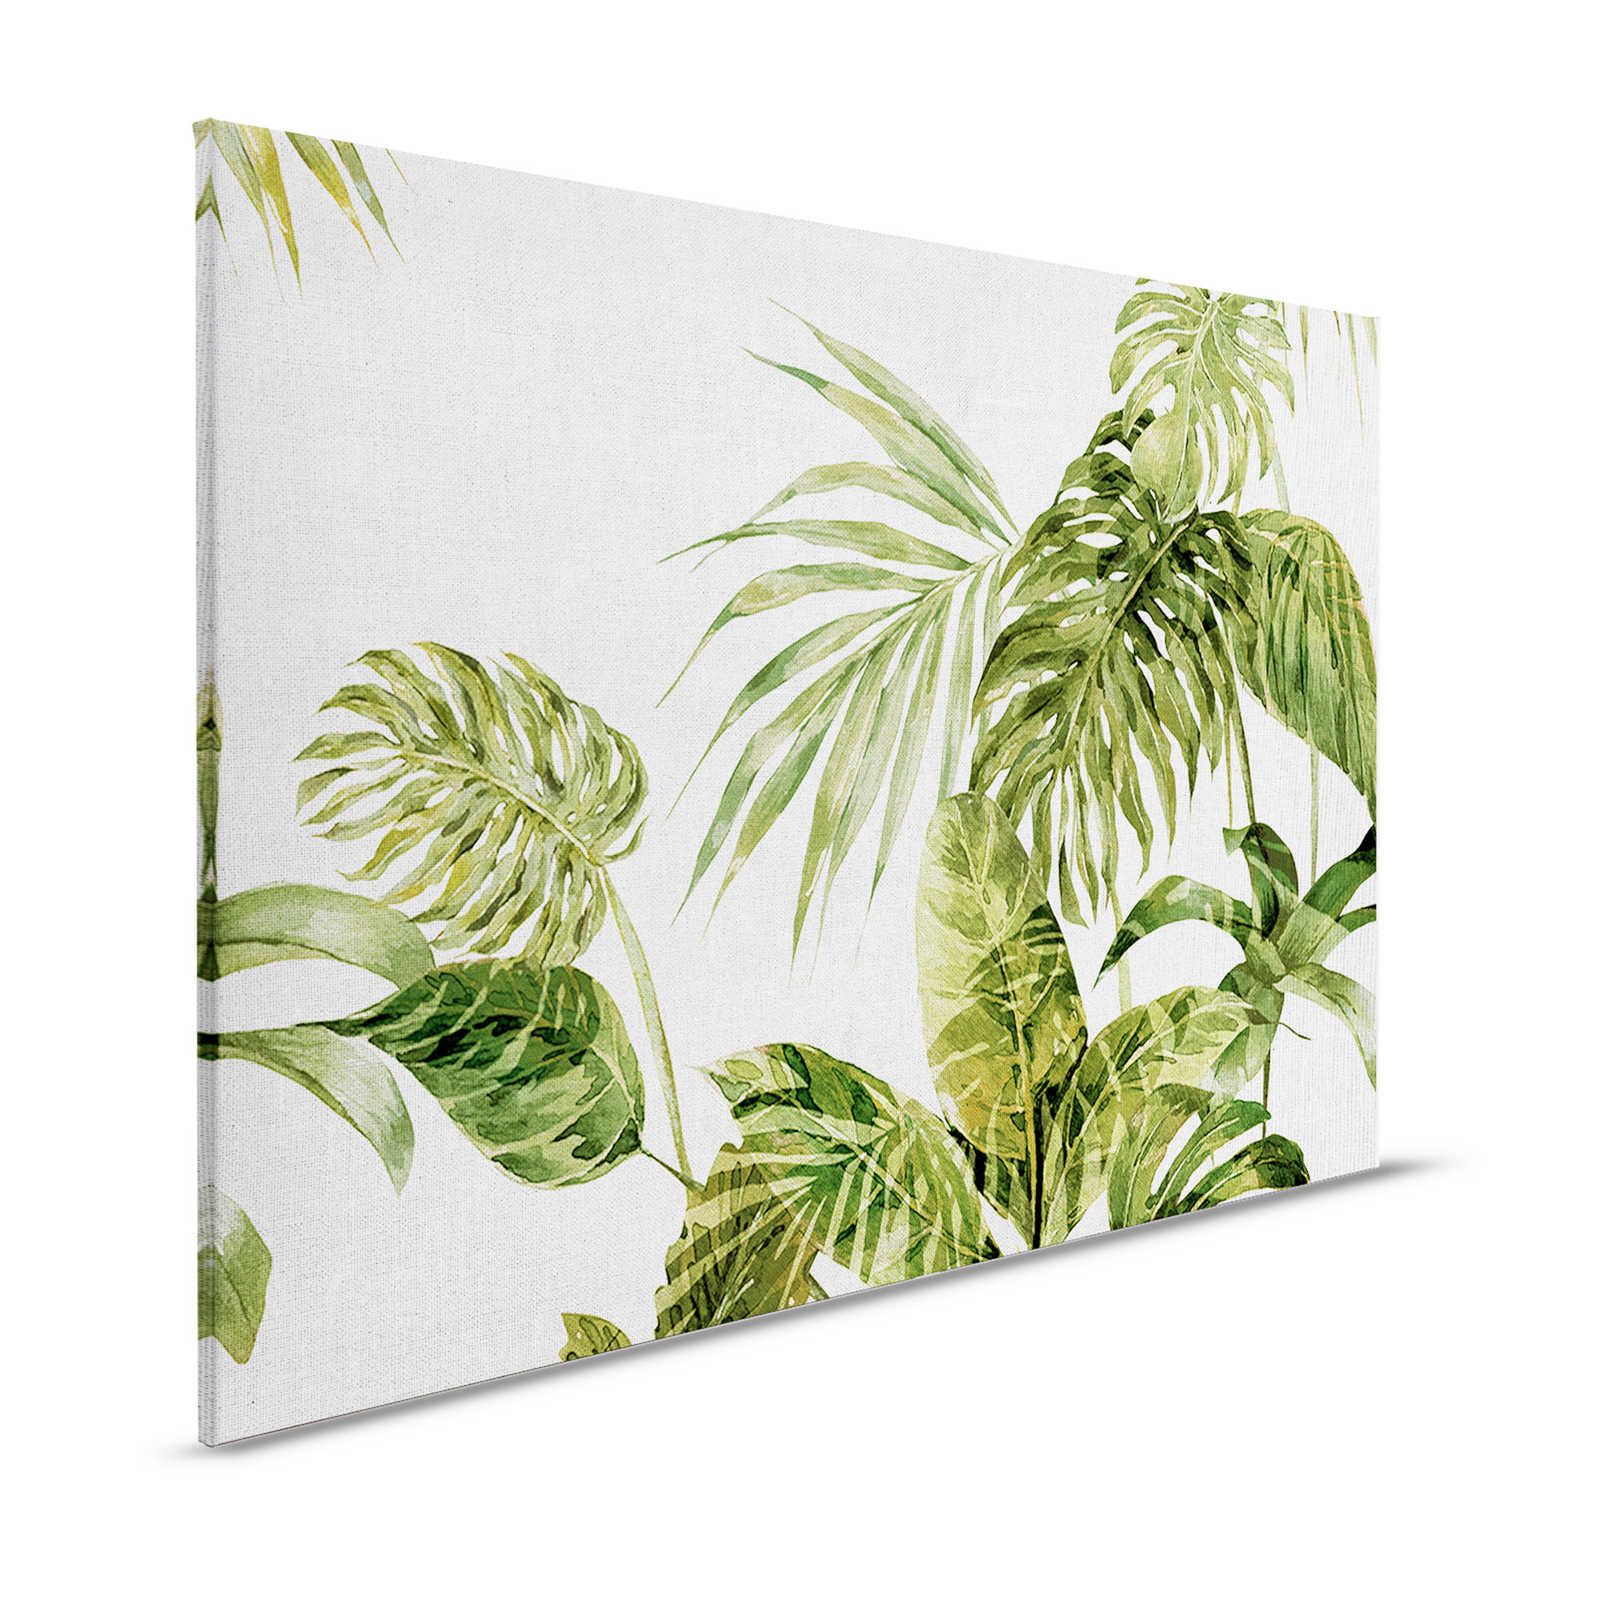 Tropical Canvas Painting Watercolour Monstera Leaves - 1.20 m x 0.80 m
